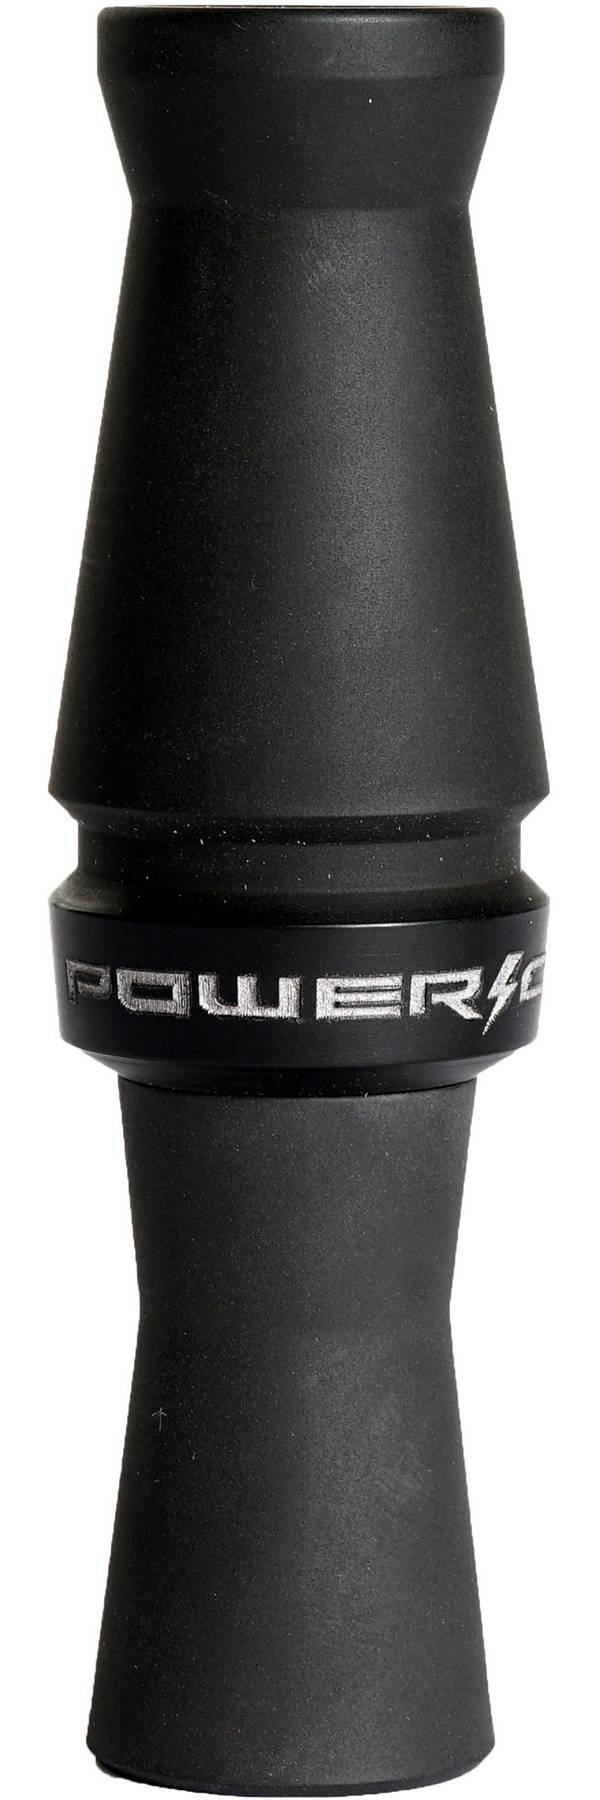 Power Calls Surge Canadian Goose Call product image